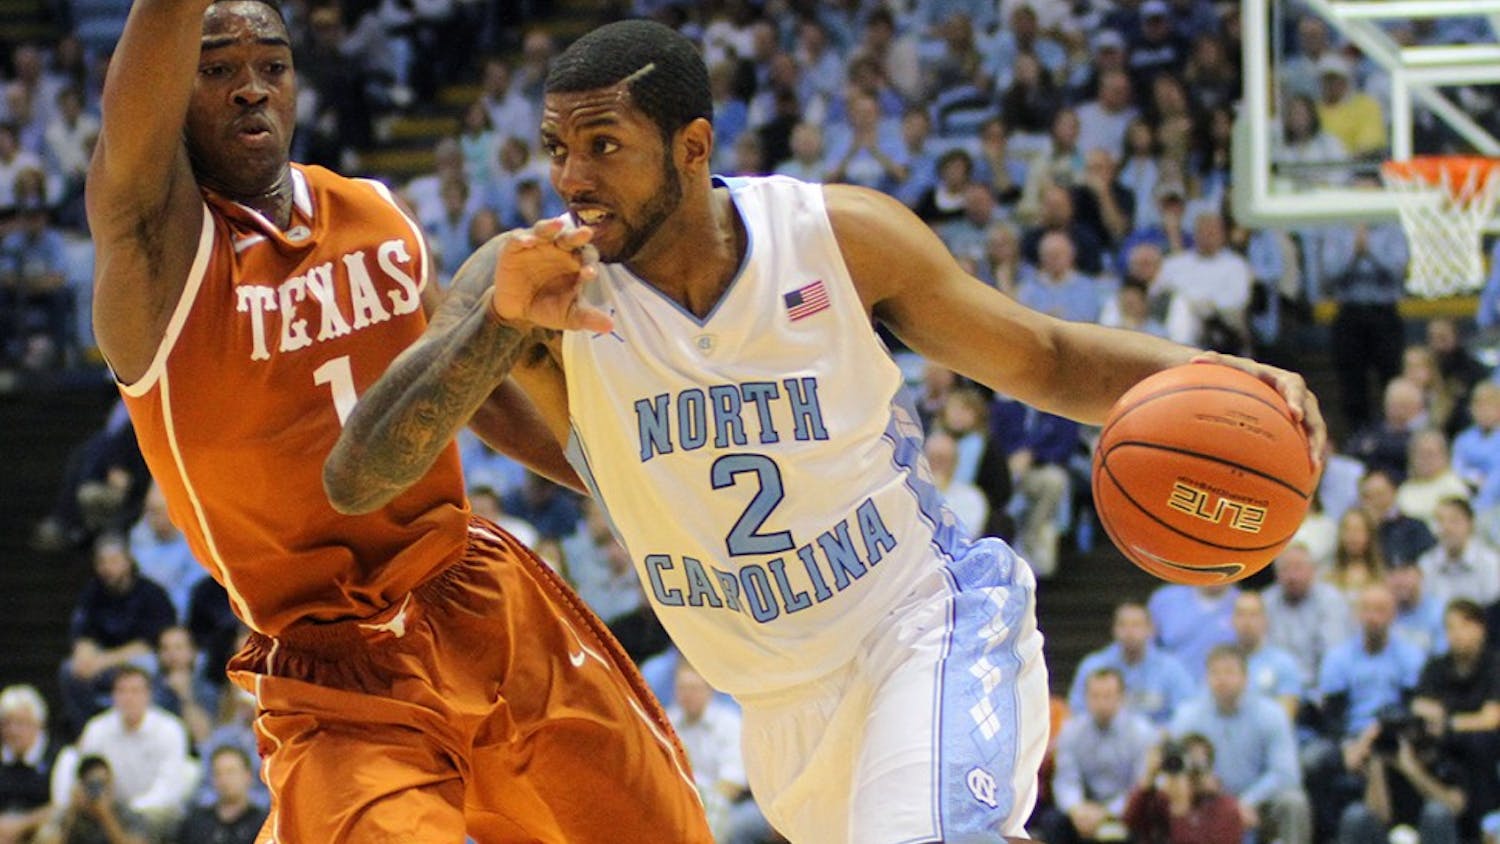 	The Texas Longhorns defeat the Tar Heels 86-83 in Chapel Hill on Wednesday night.